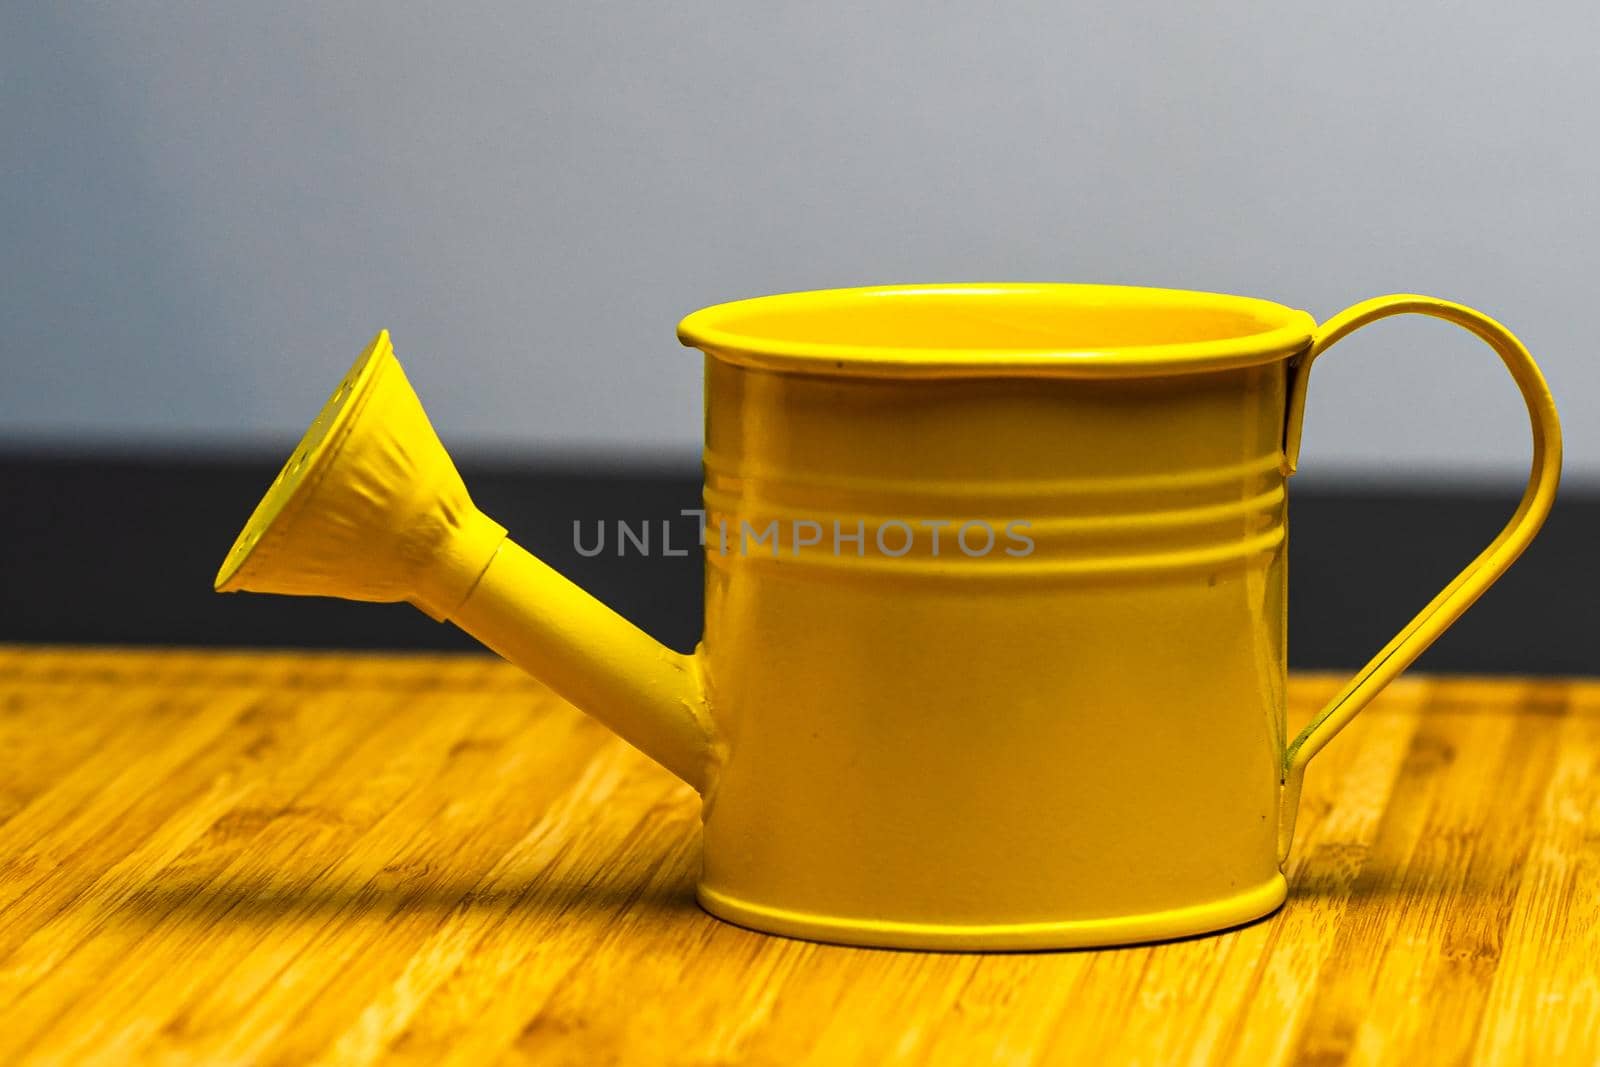 Yellow watering can on wooden table